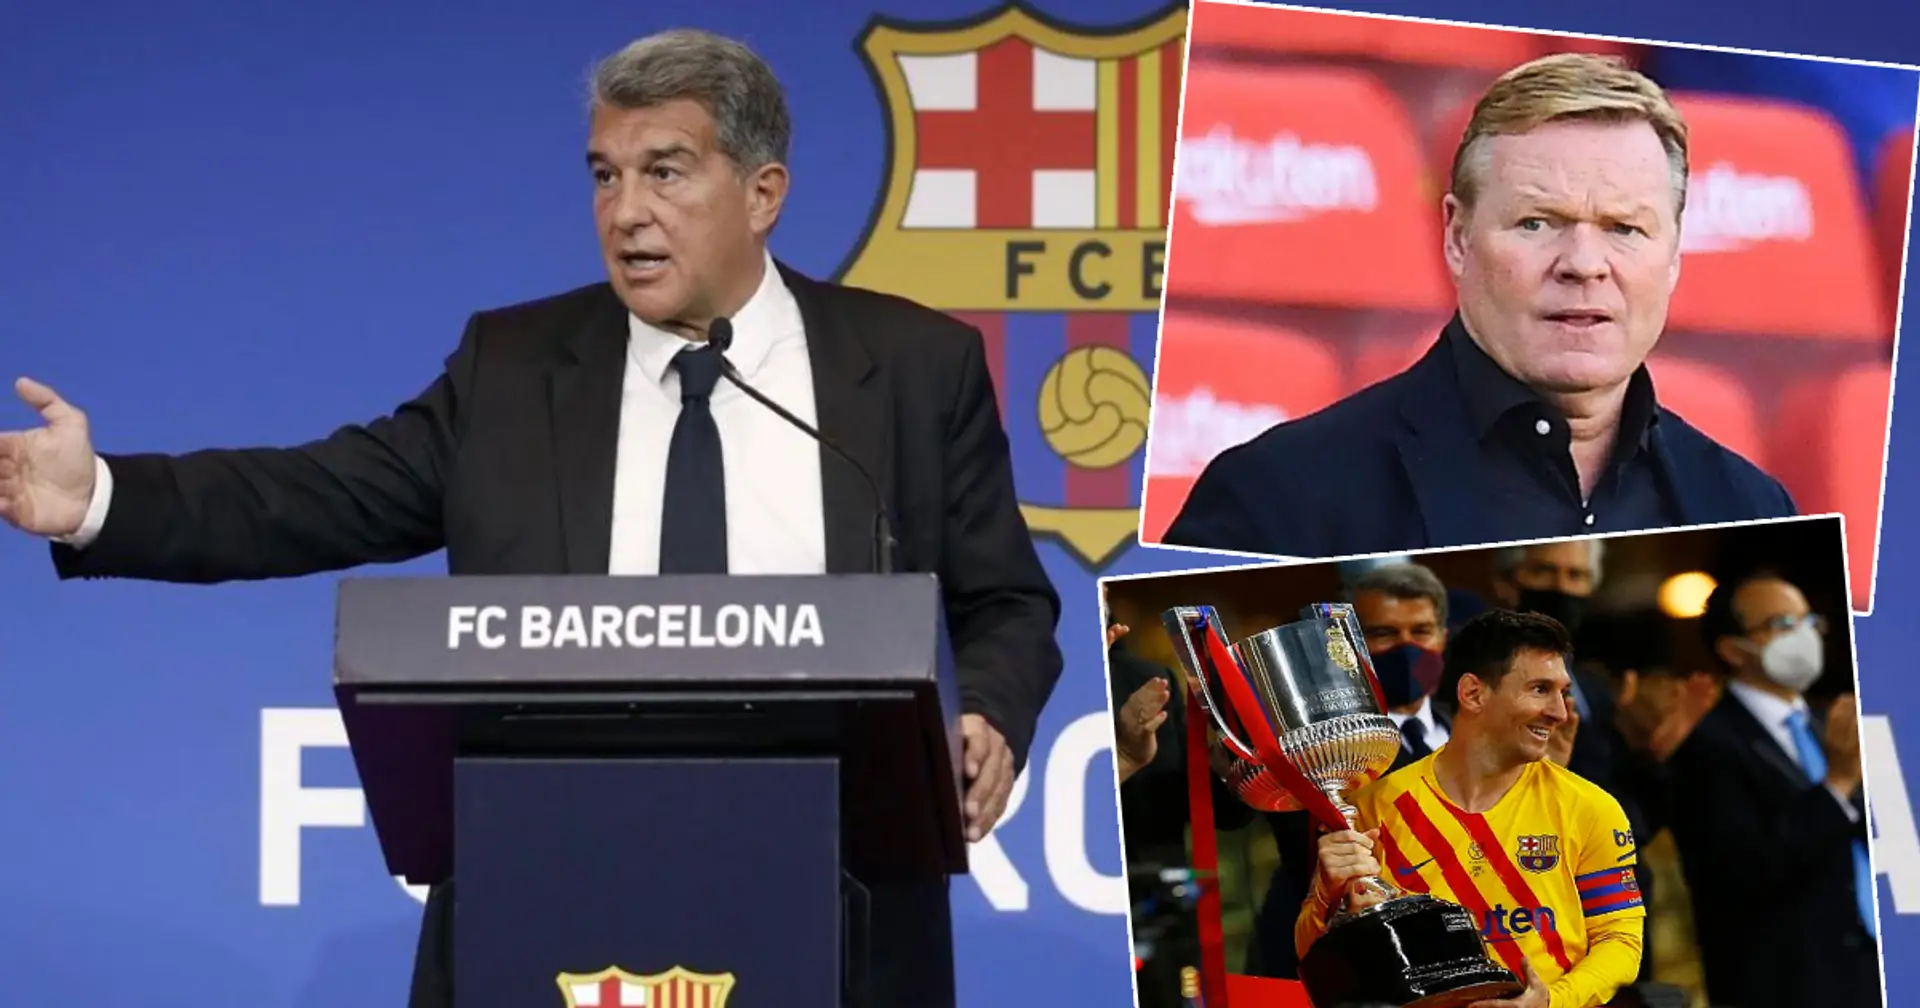 Laporta completes first 100 days in office - how do we rate him so far?